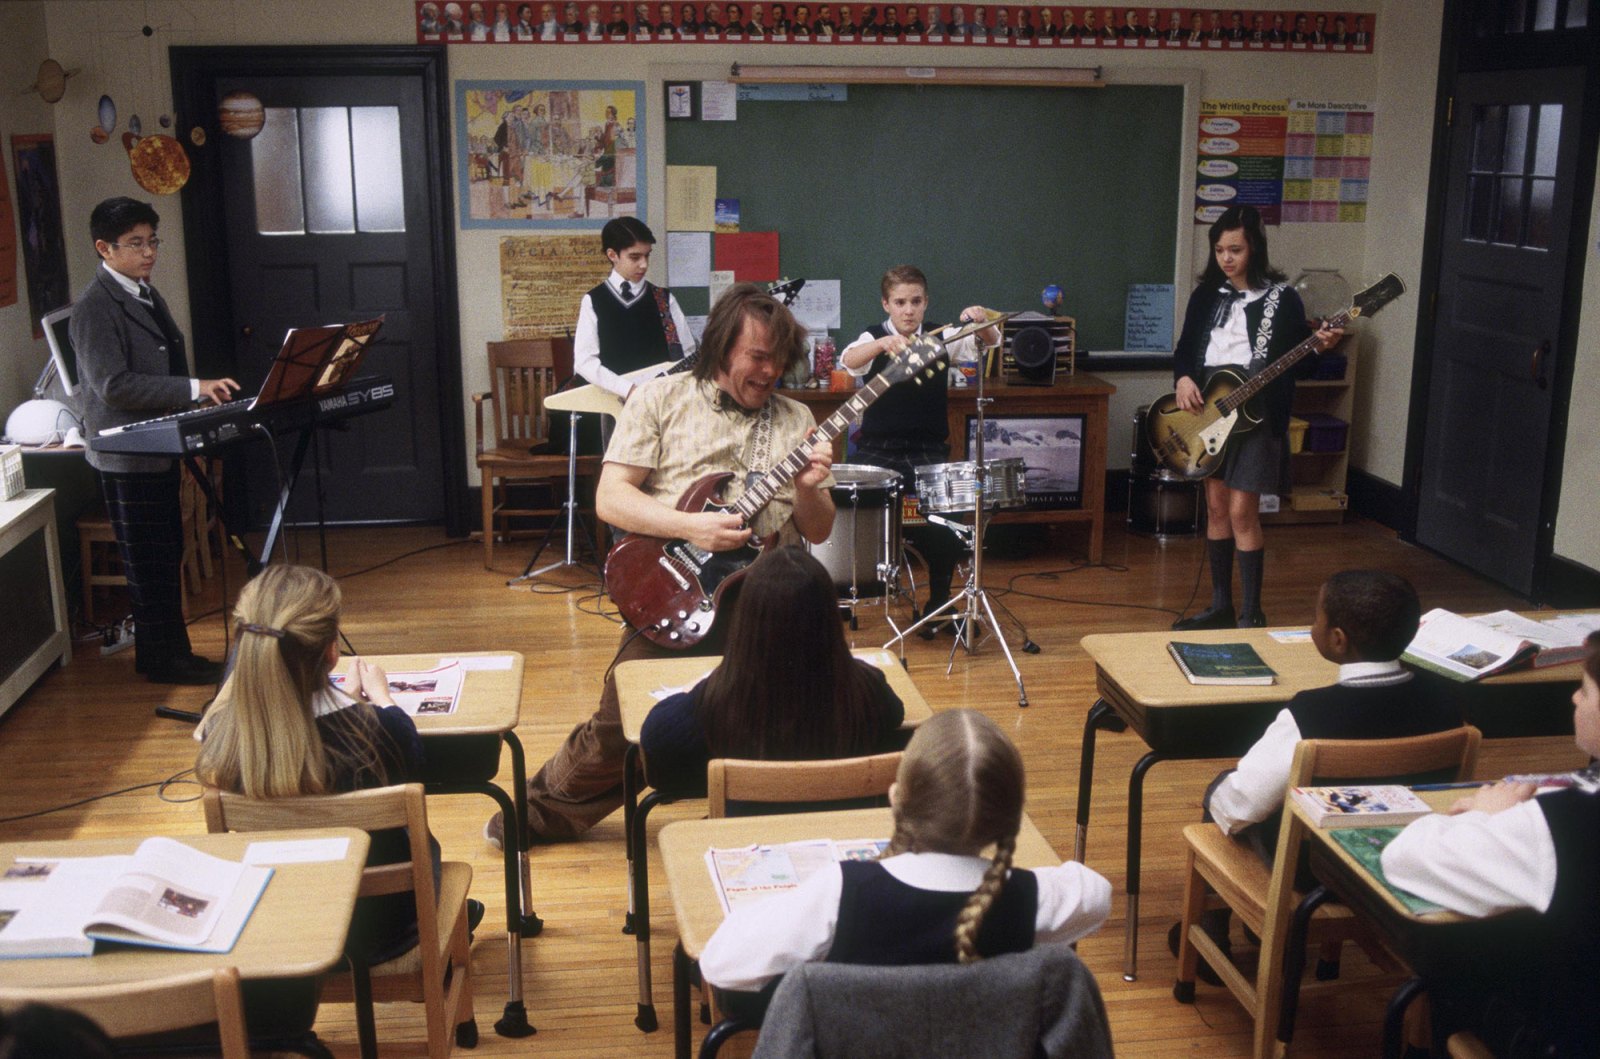 8. How to Style Your Hair Like Joan Cusack in "School of Rock" - wide 2